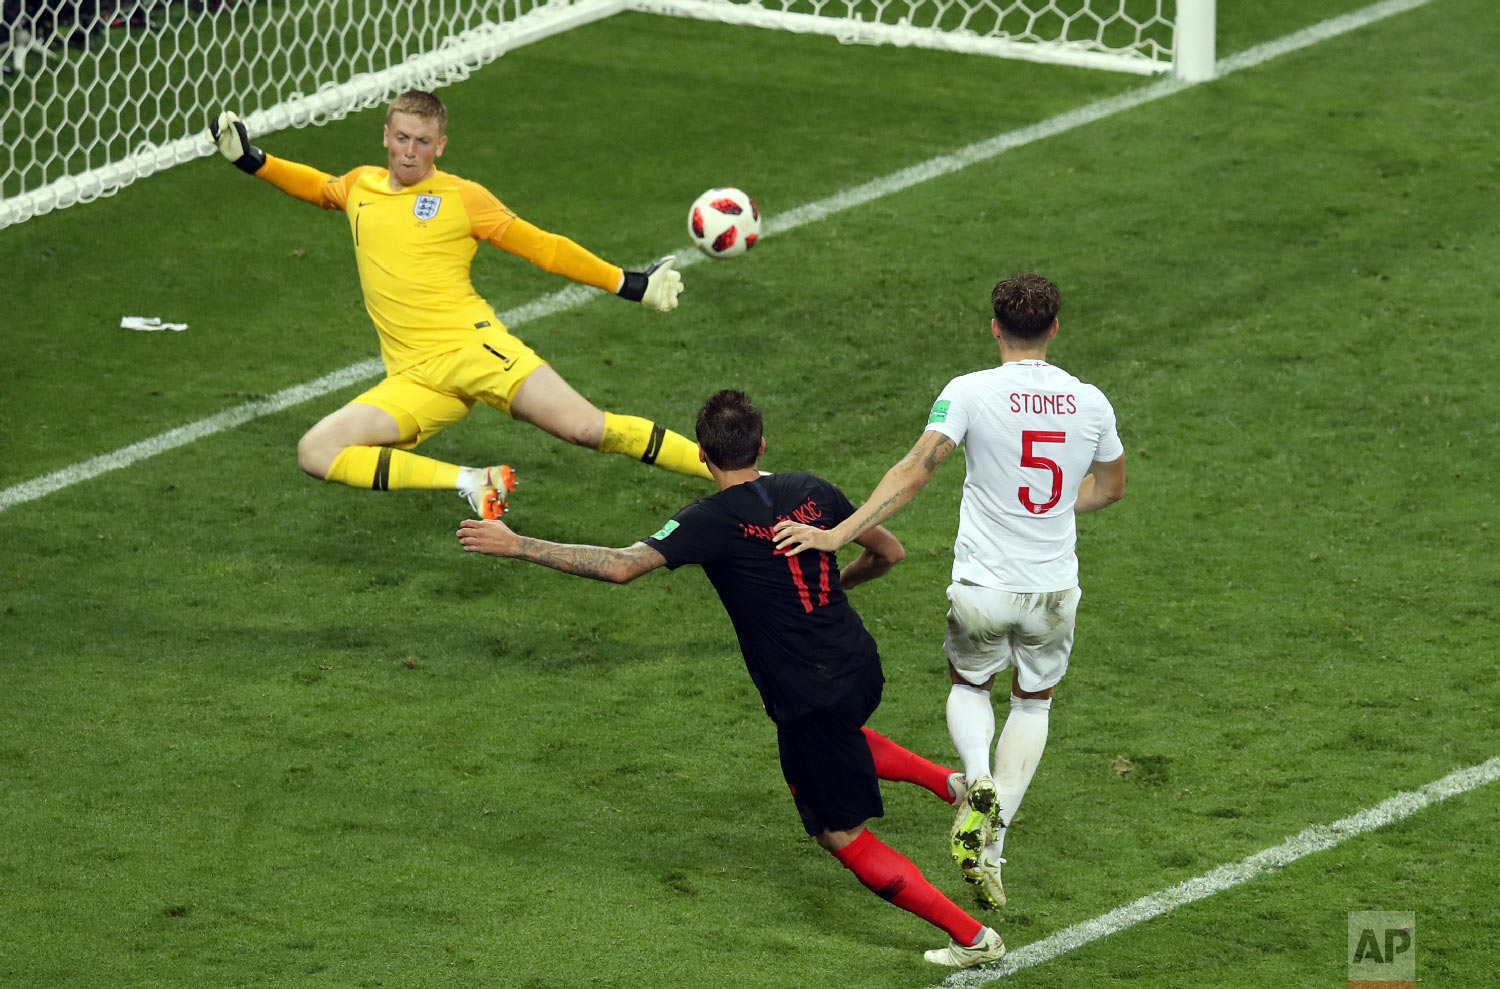  Croatia's Mario Mandzukic, 2nd right, scores his side's second goal during the semifinal match between Croatia and England at the 2018 soccer World Cup in the Luzhniki Stadium in Moscow, Russia, Wednesday, July 11, 2018. (AP Photo/Thanassis Stavraki